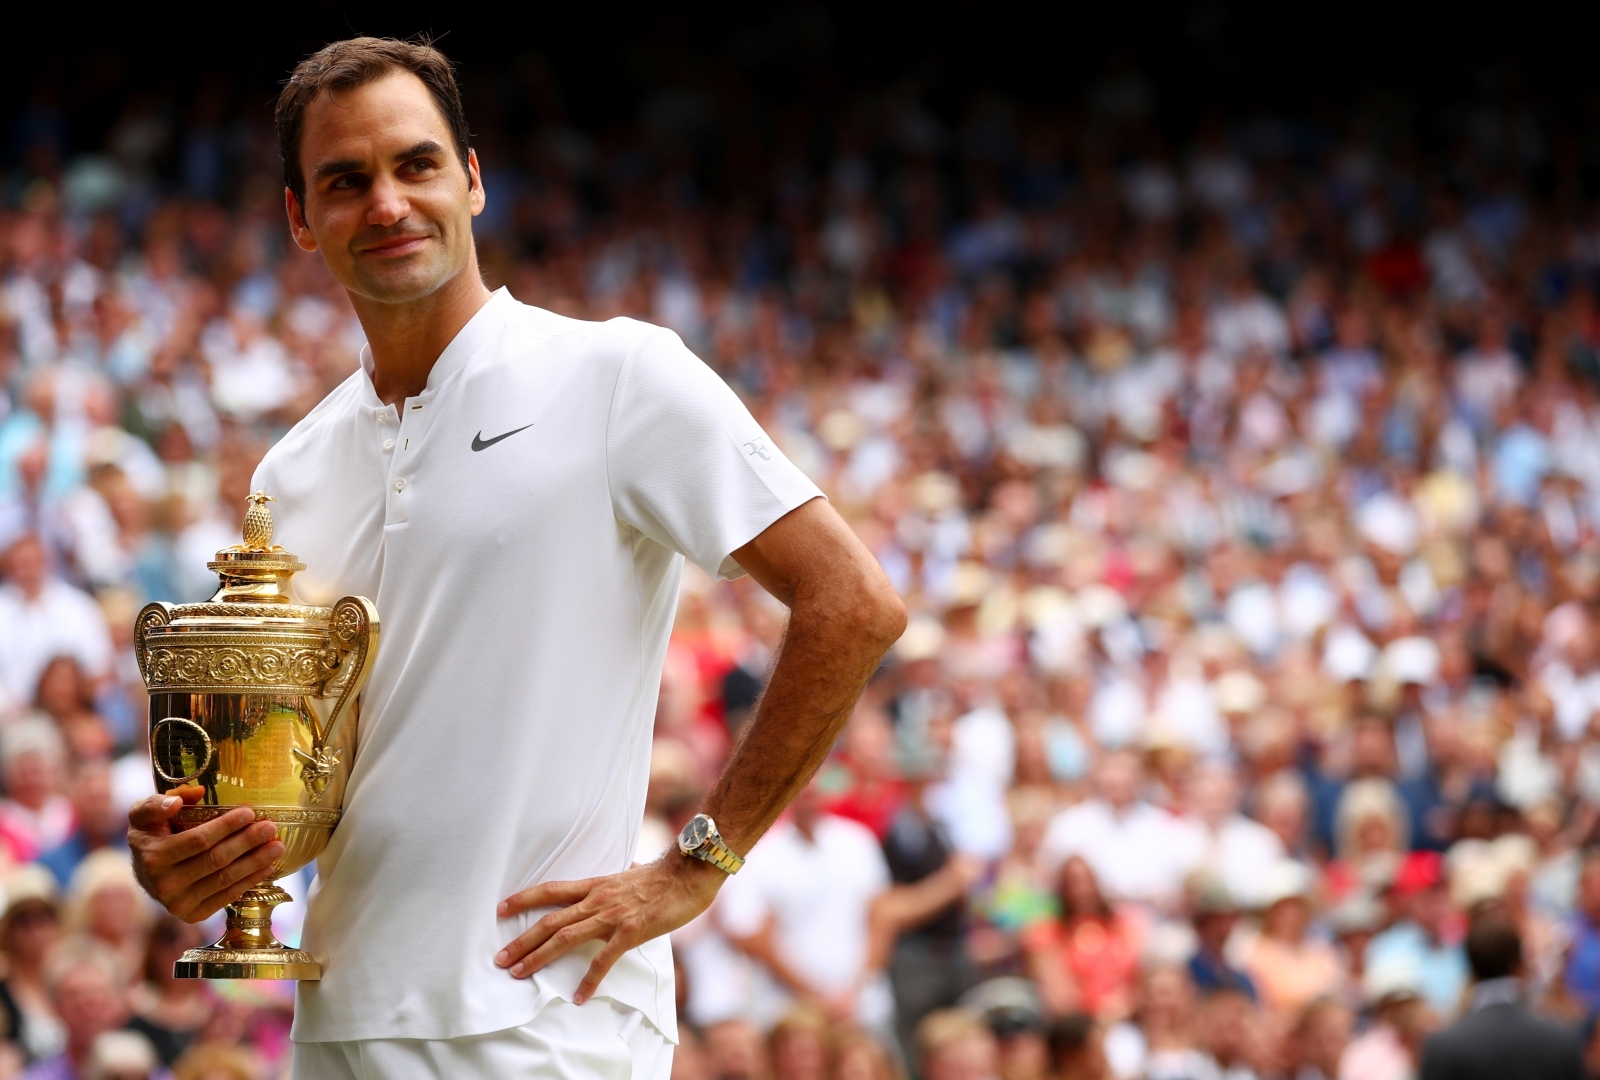 Roger Federer greater than Cristiano Ronaldo or Lionel Messi, says Boris Becker